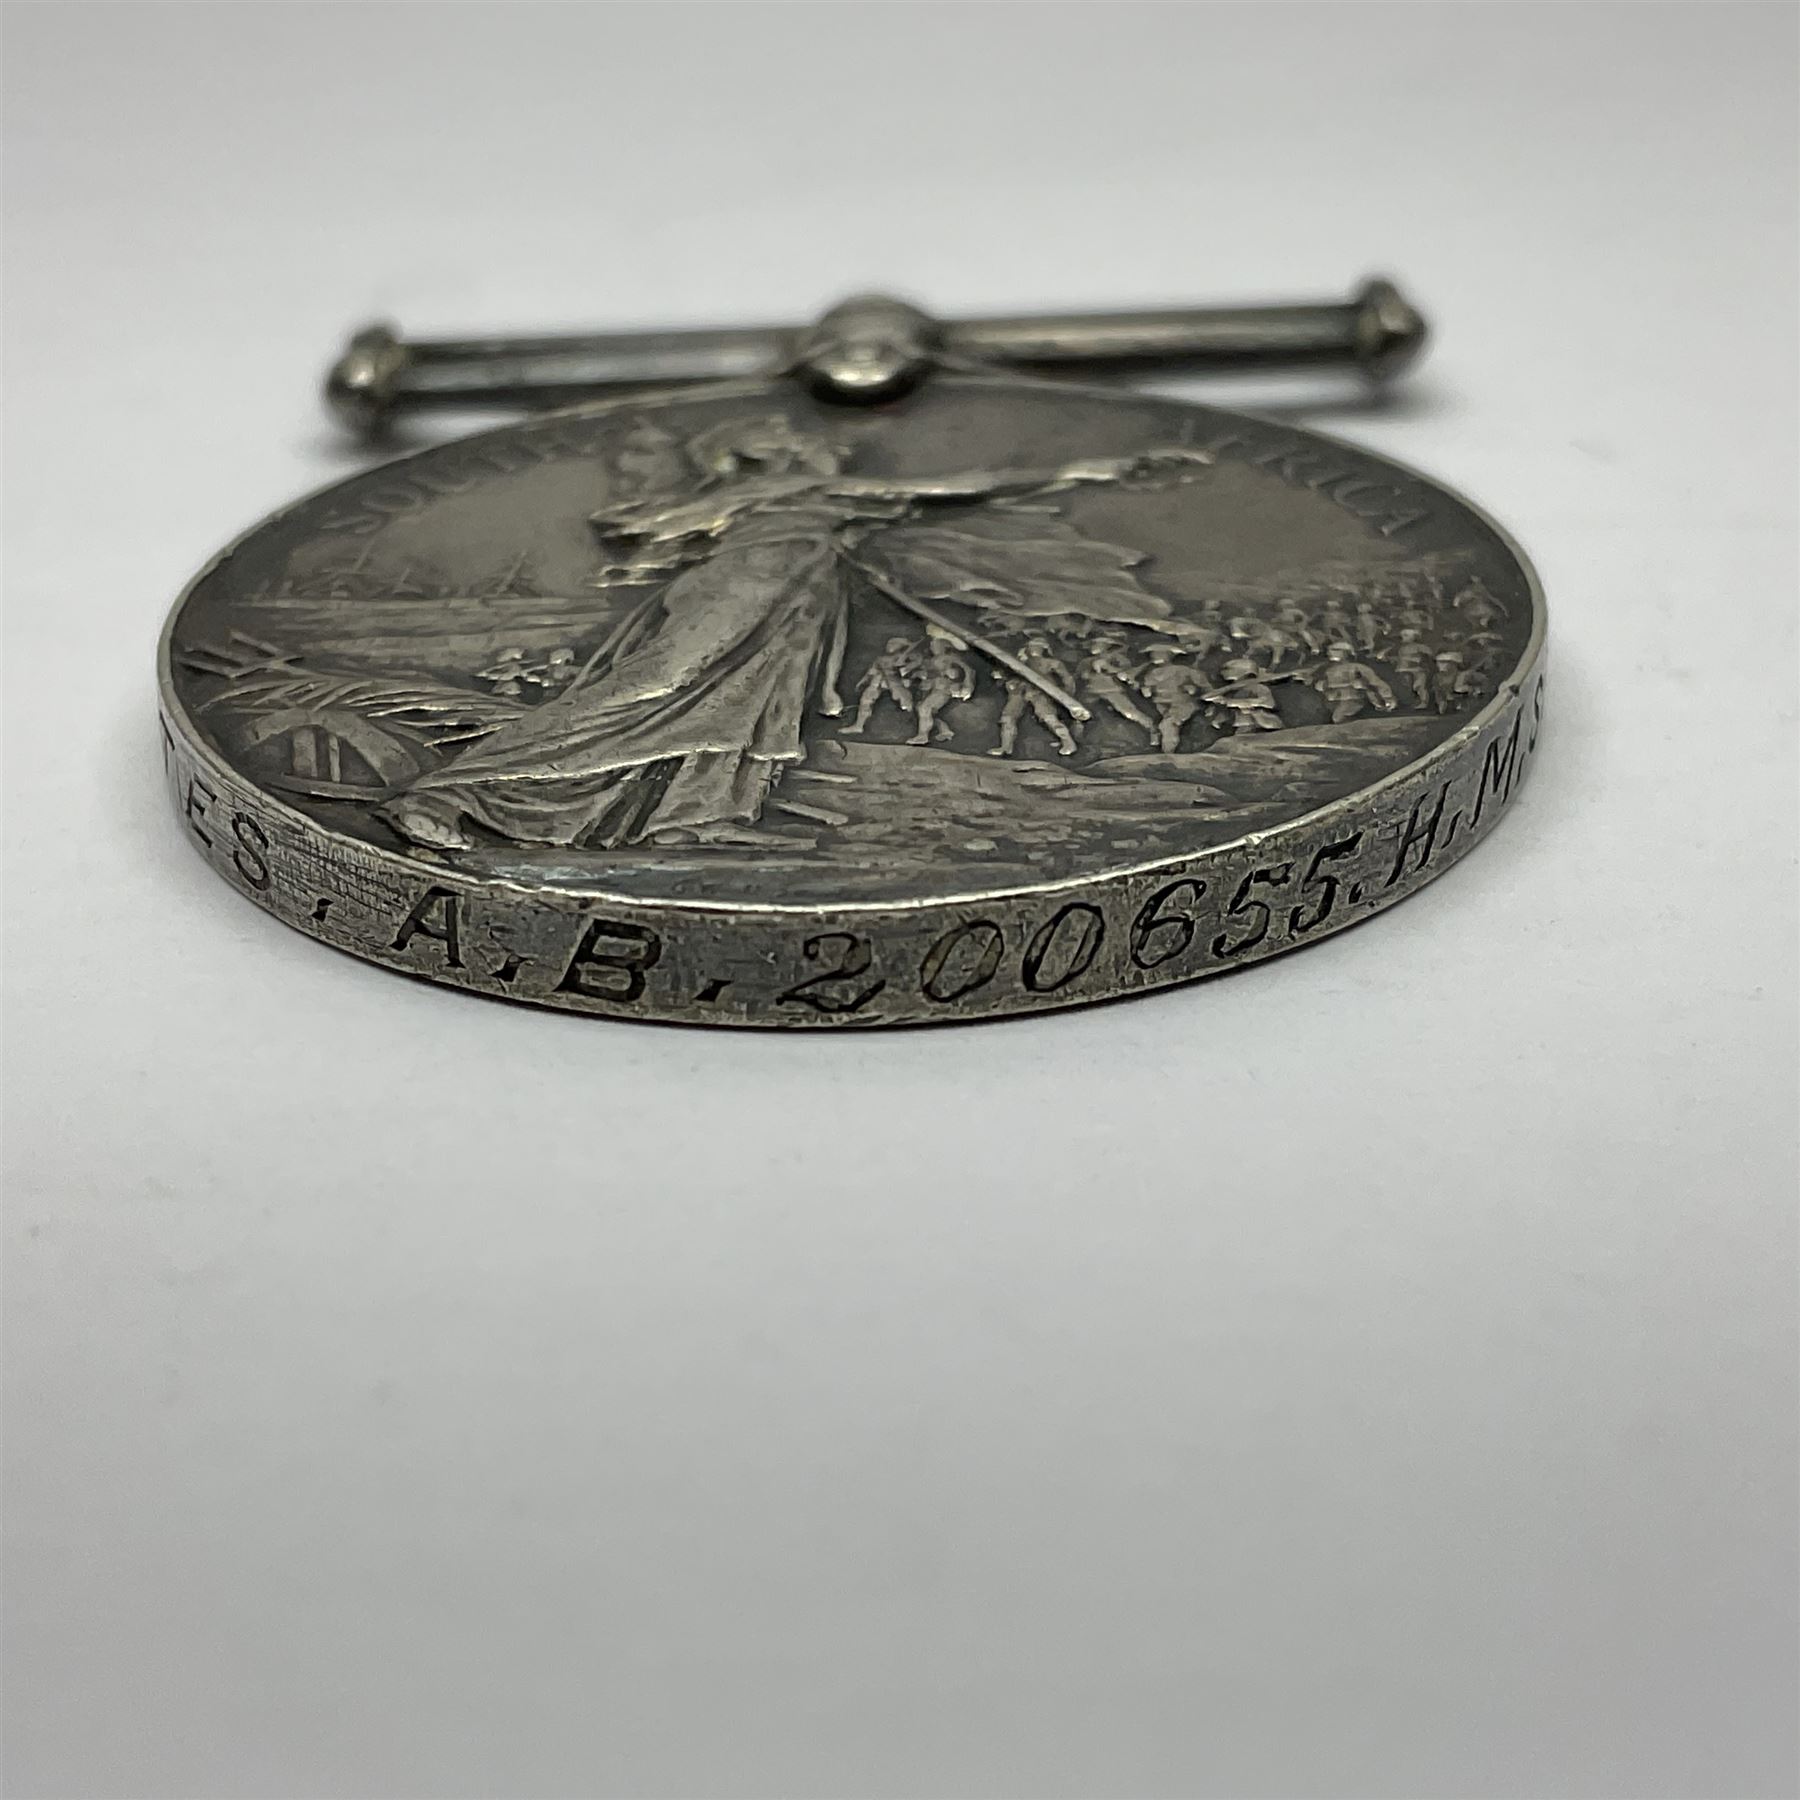 Victoria Queens South Africa medal awarded to W.C. Yates A.B. 200655 H.M.S. Syble - Image 5 of 6